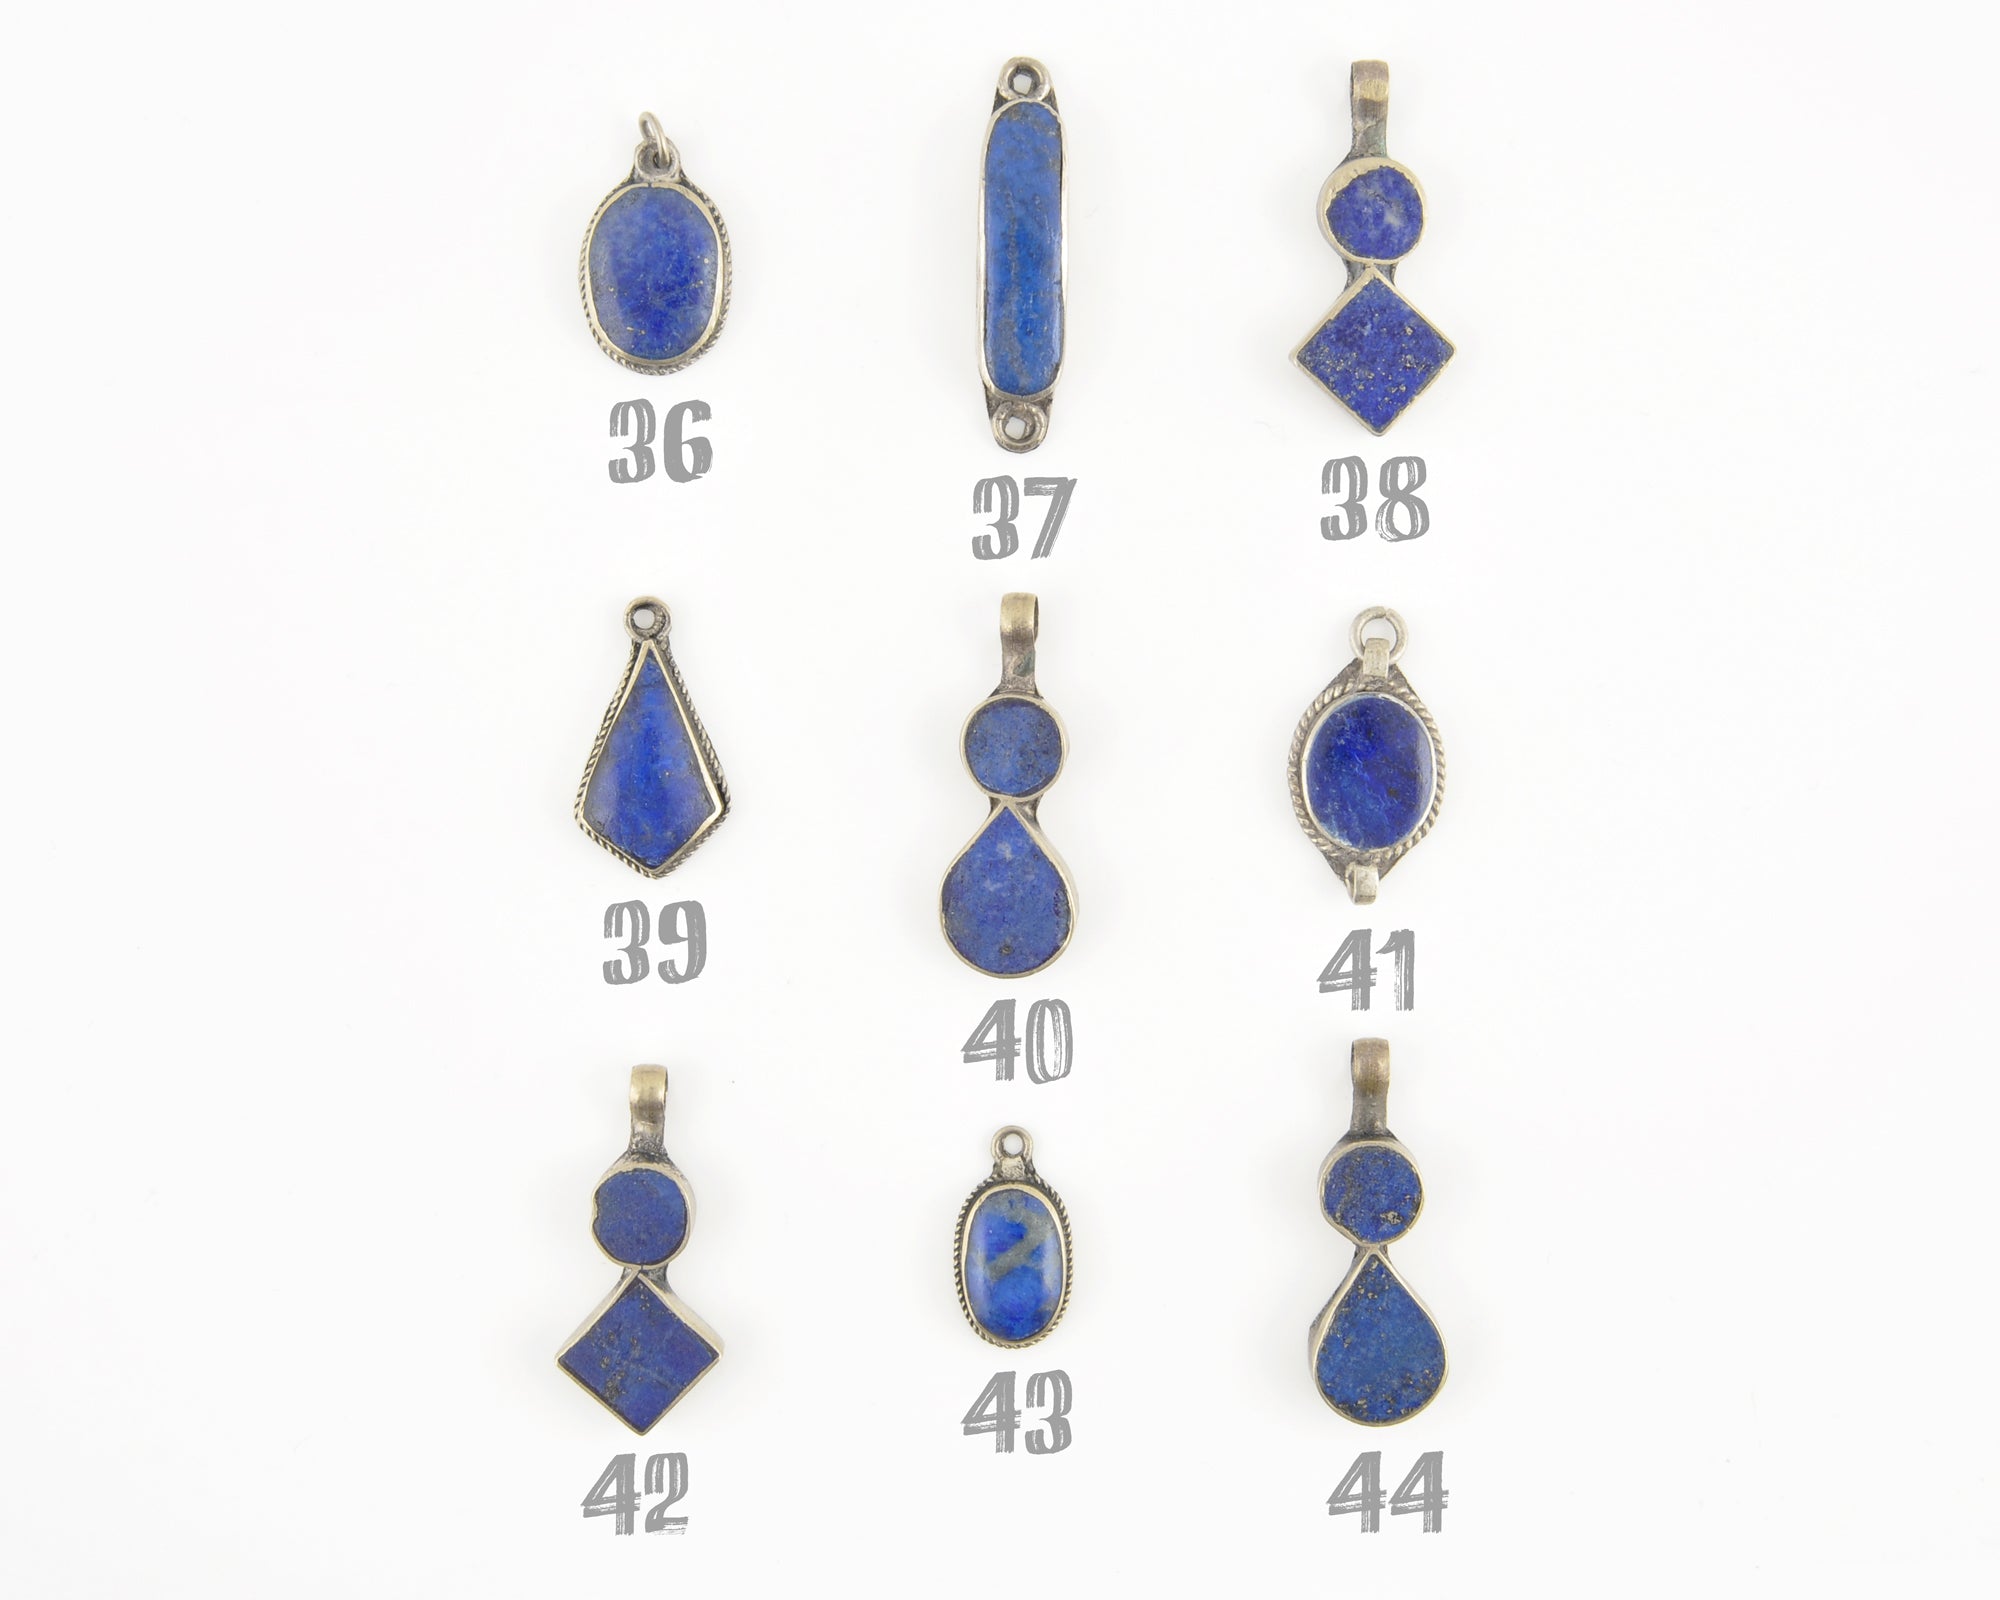 Vintage Charms and Connectors-Lapis Lazuli And Nickel Silver-One of a Kind-Choose Your Style-Quantity 1 Tamara Scott Designs